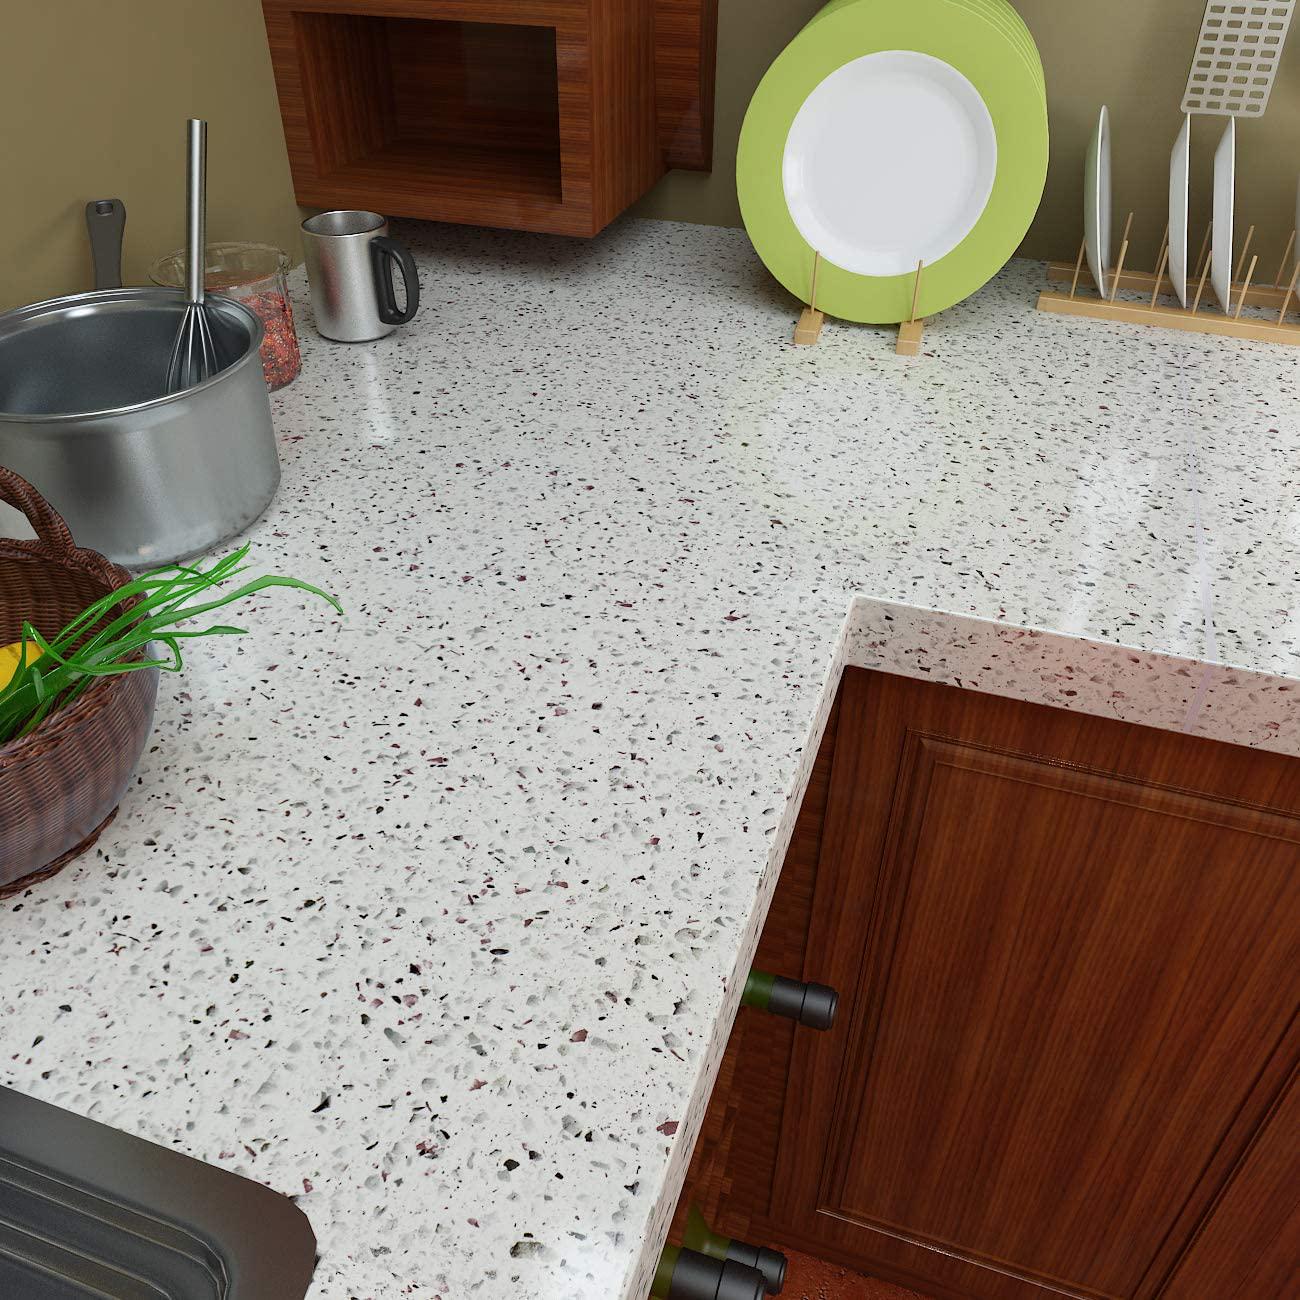 Livelynine, Livelynine 15.8 x394 White Granite Countertop Peel and Stick Wallpaper Terrazzo Contact Paper for Countertops Waterproof Granite Table Top Sticker Cover Kitchen Counter Top Covers Removable Sticky